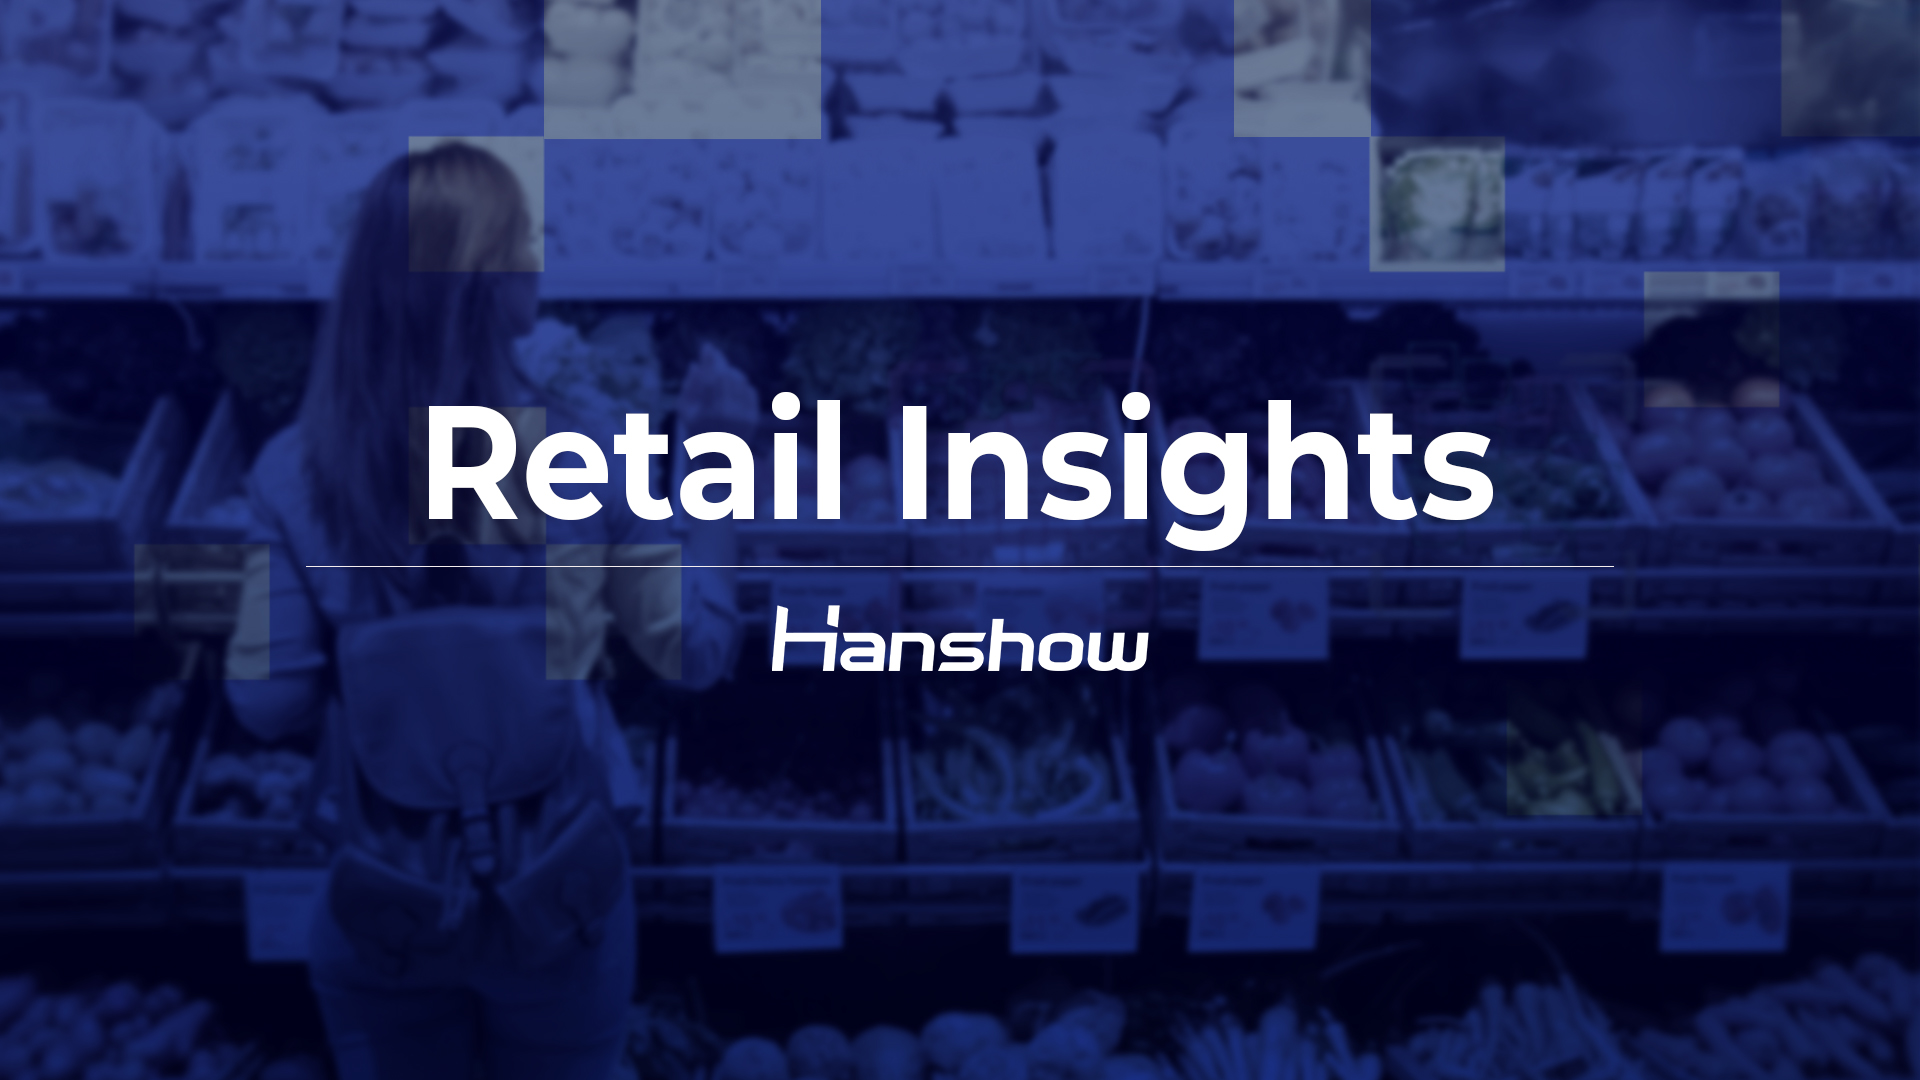 Hanshow’s Digital Retail Solutions Make a Difference for Retailers on Black Friday